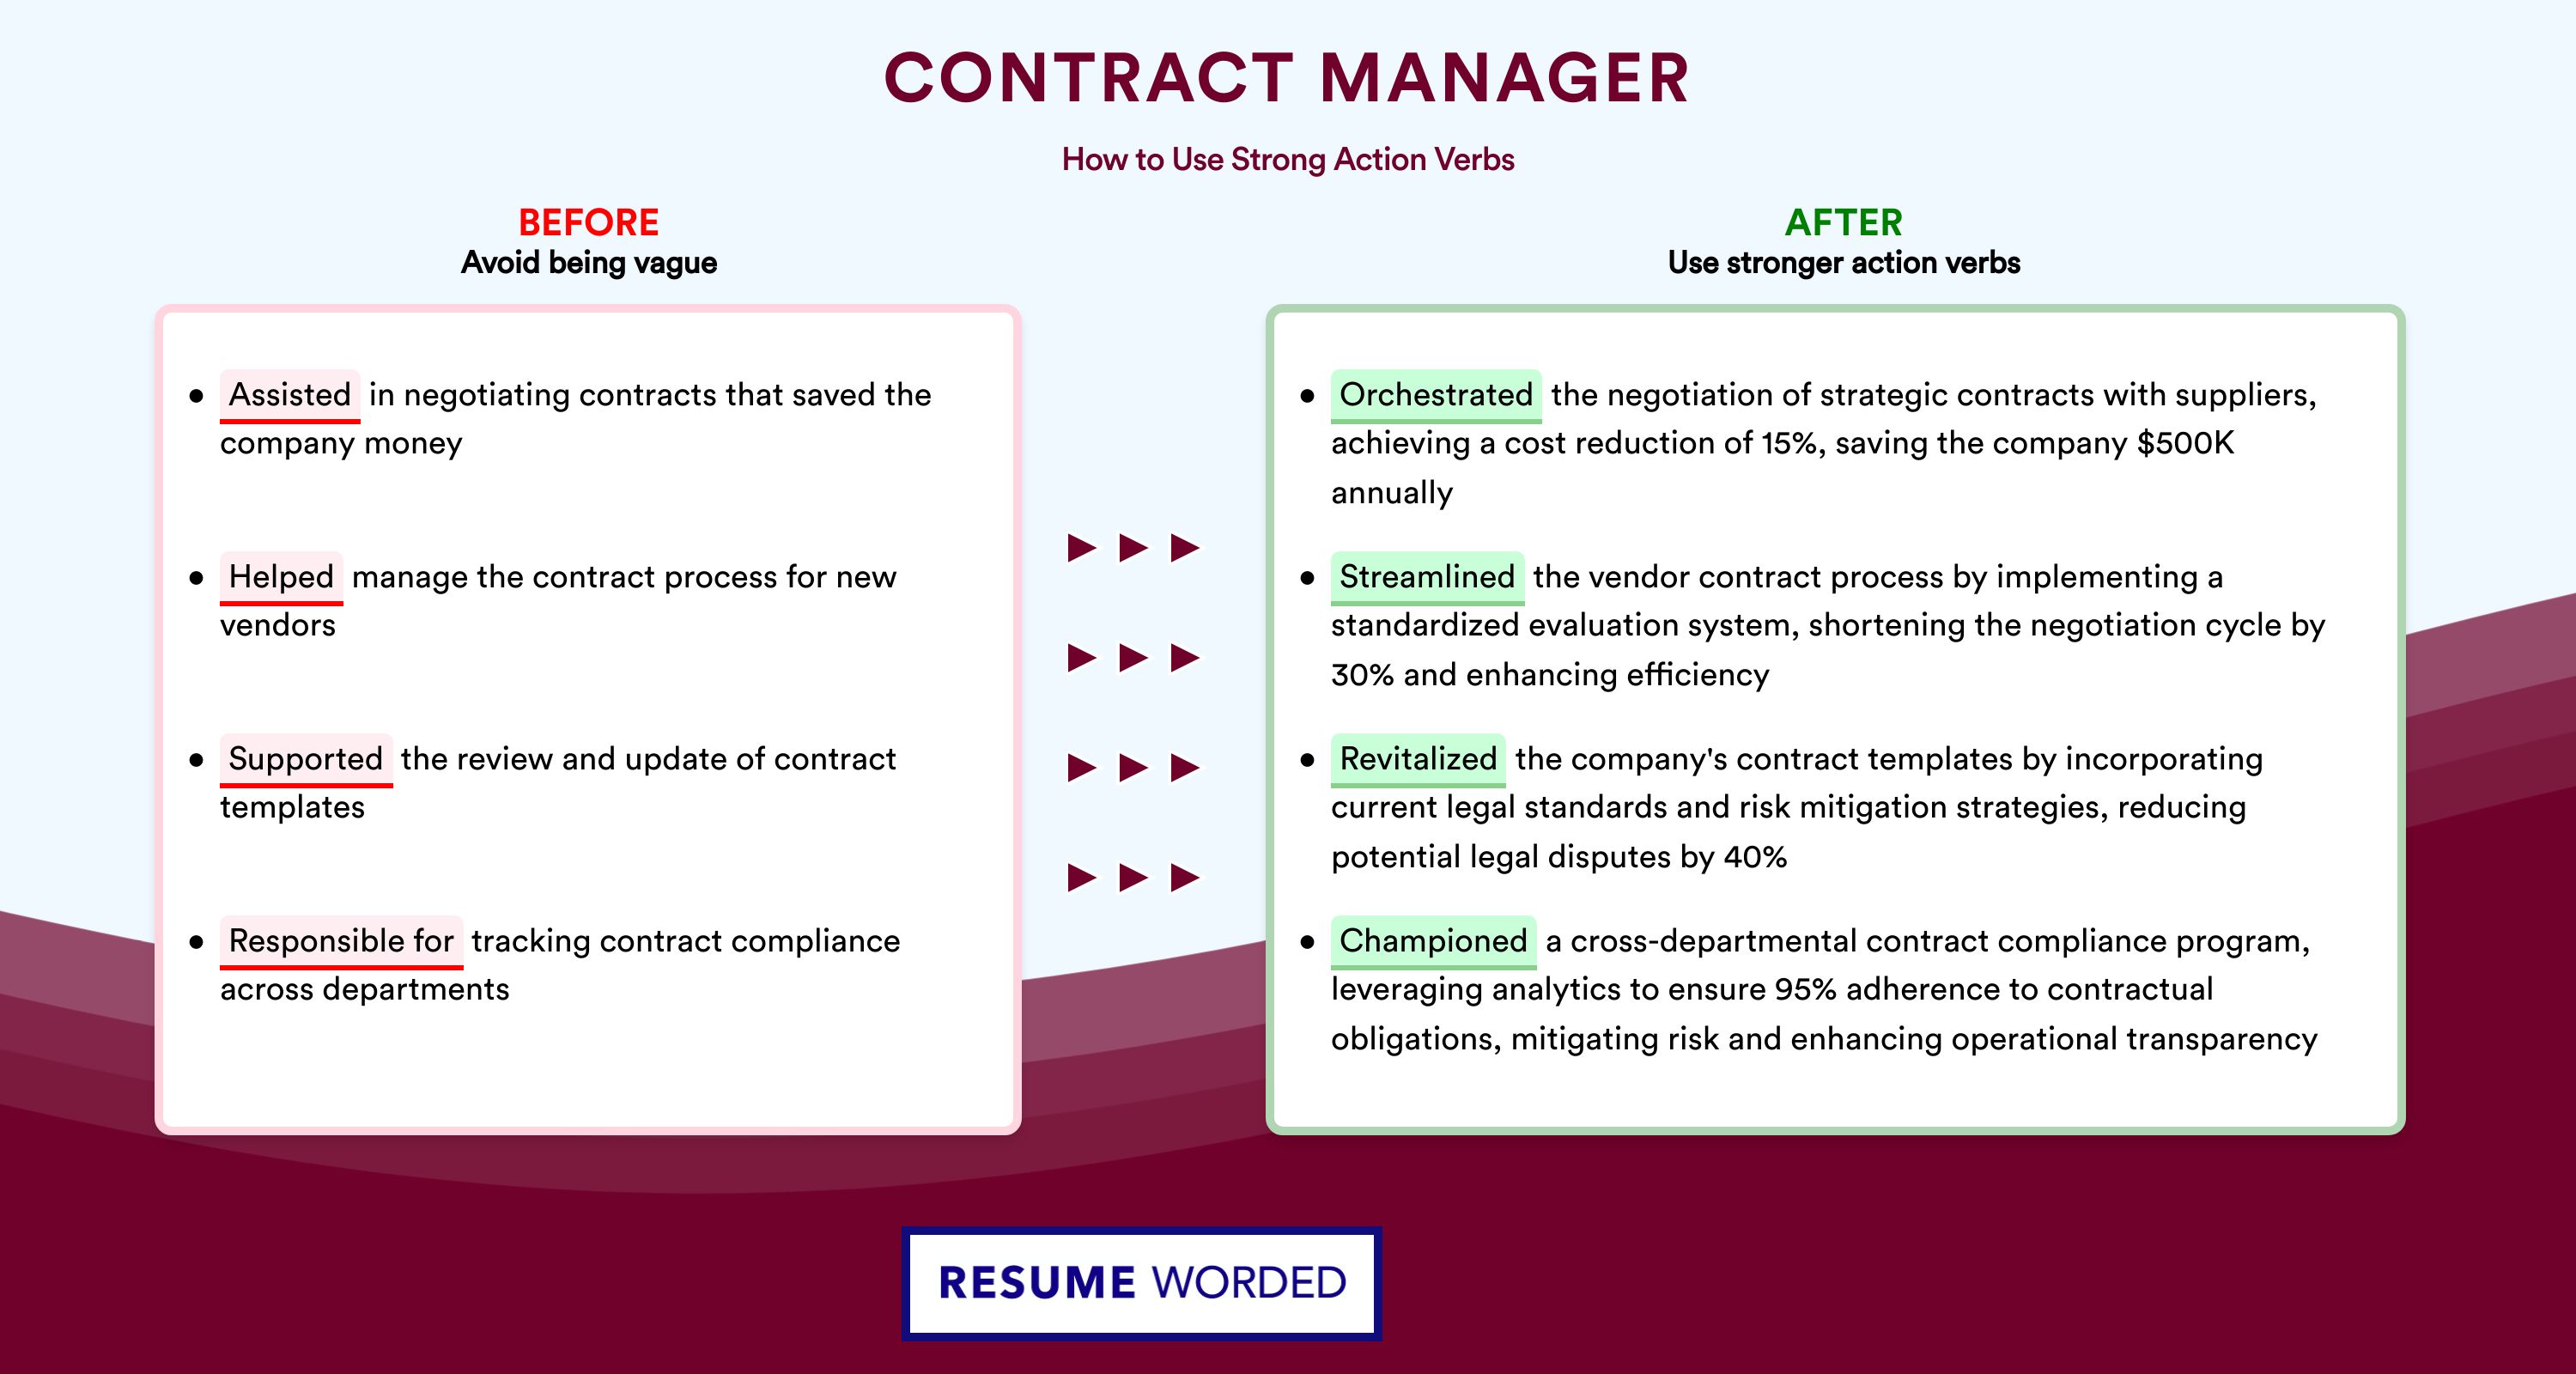 Action Verbs for Contract Manager